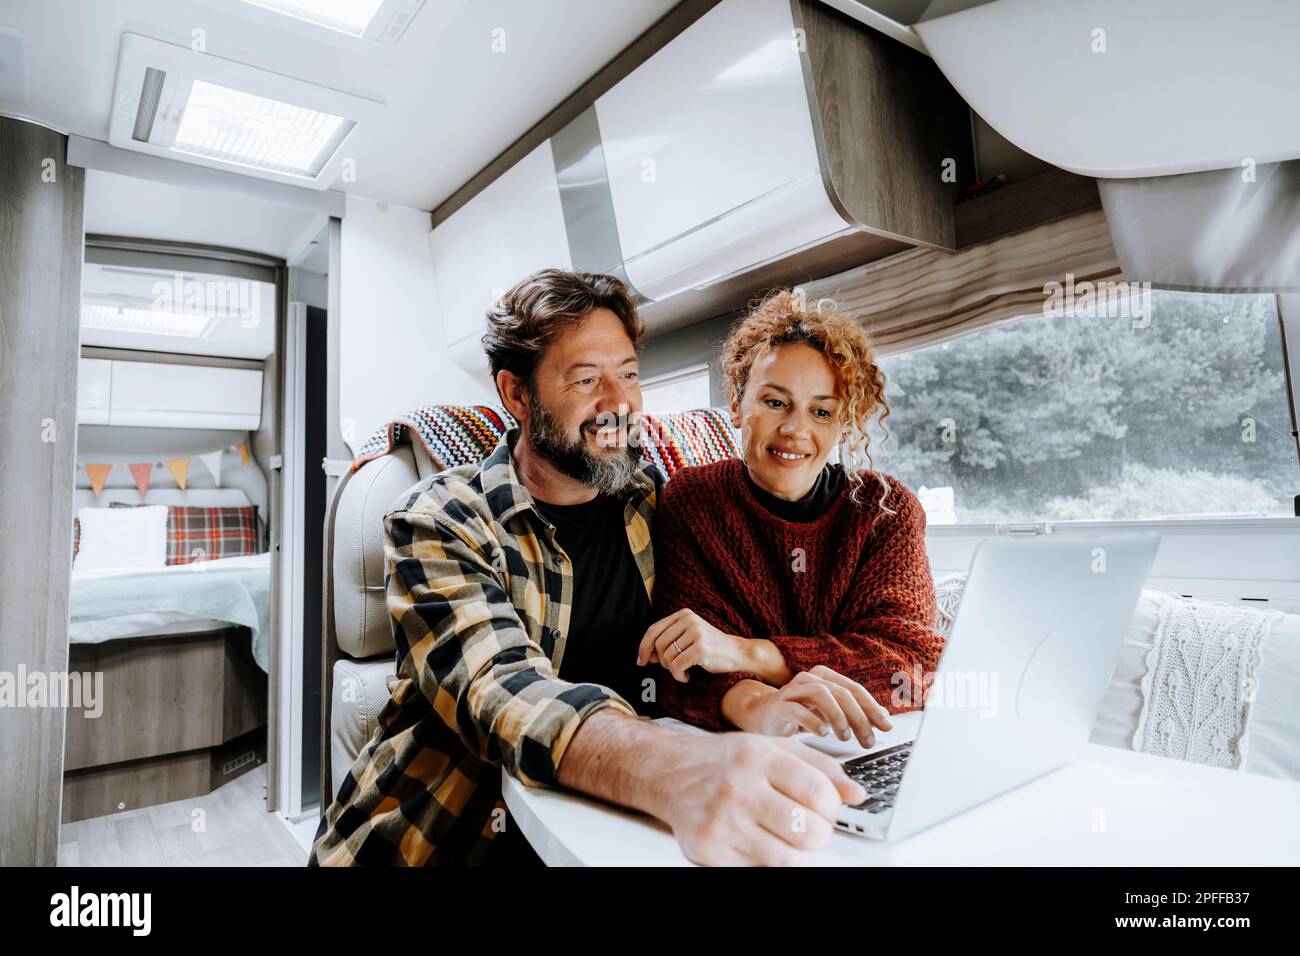 Happy travel couple lifestyle smile and use laptop together inside a modern camper van in vanlife offgrid alternative office workplace. Adventure life Stock Photo